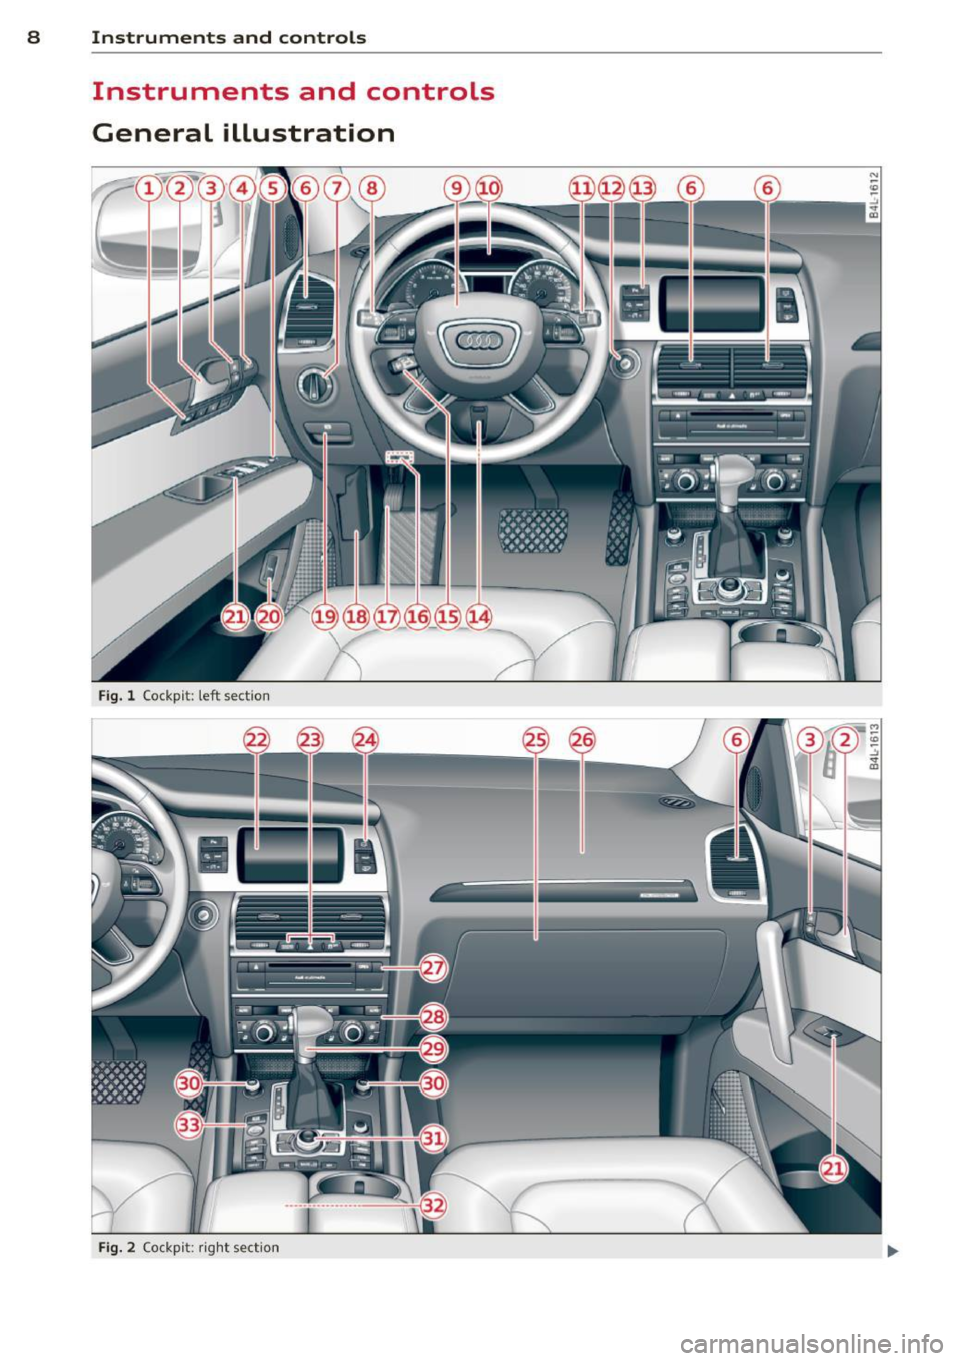 AUDI Q7 2012  Owner´s Manual 8  Instruments and controls 
Instruments  and  controls 
General  illustration 
Fig. l Cockp it:  left  sect io n 
-----
-----
----- ---
- - -- - -
~ --------
~ -,~ ---~ -·-c-•-
Fig. 2 Cock pi t: r